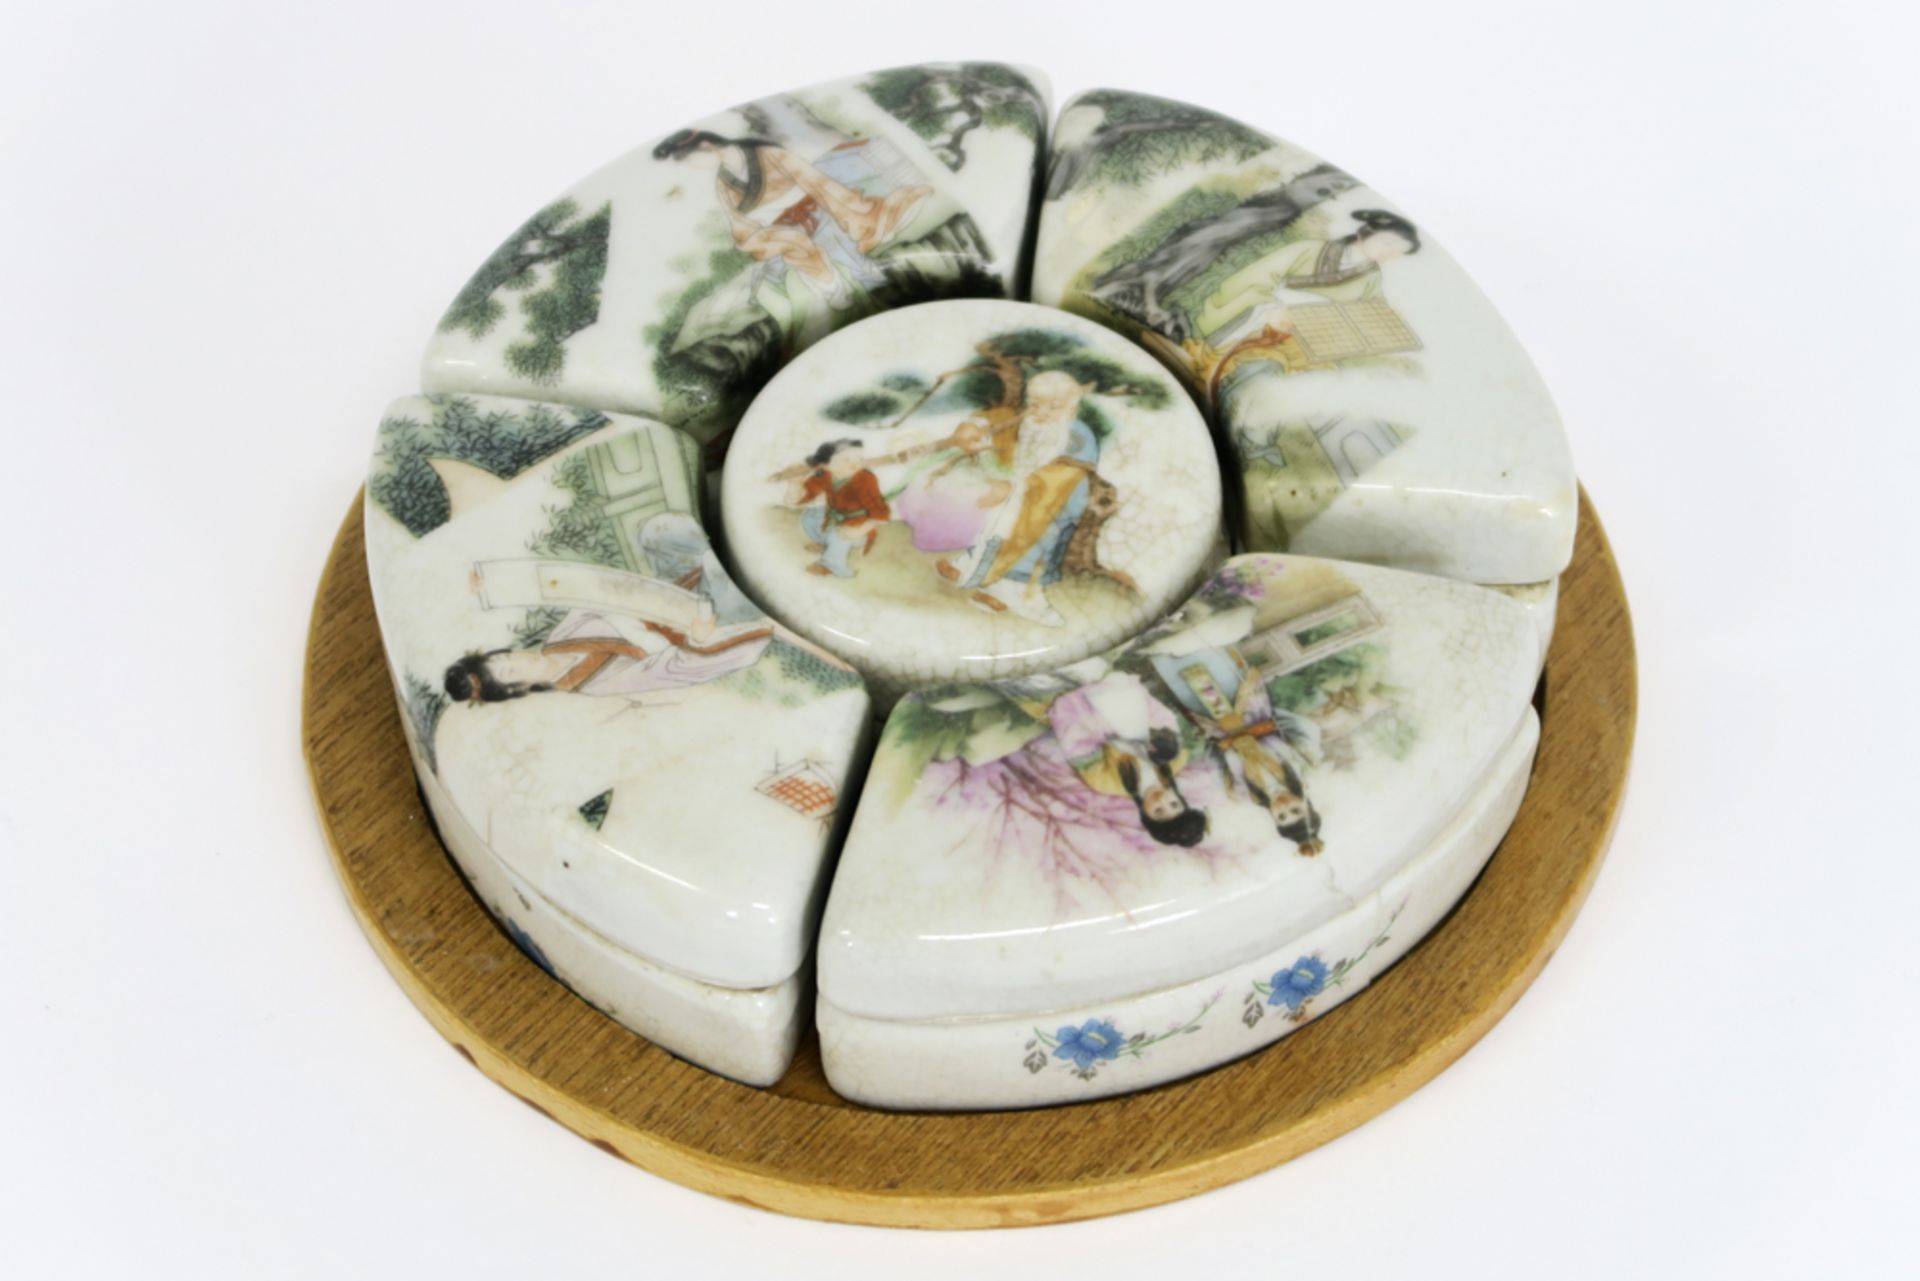 round Chinese set with five lidded boxes in porcelain with polychrome decor || Vijfdelige ronde